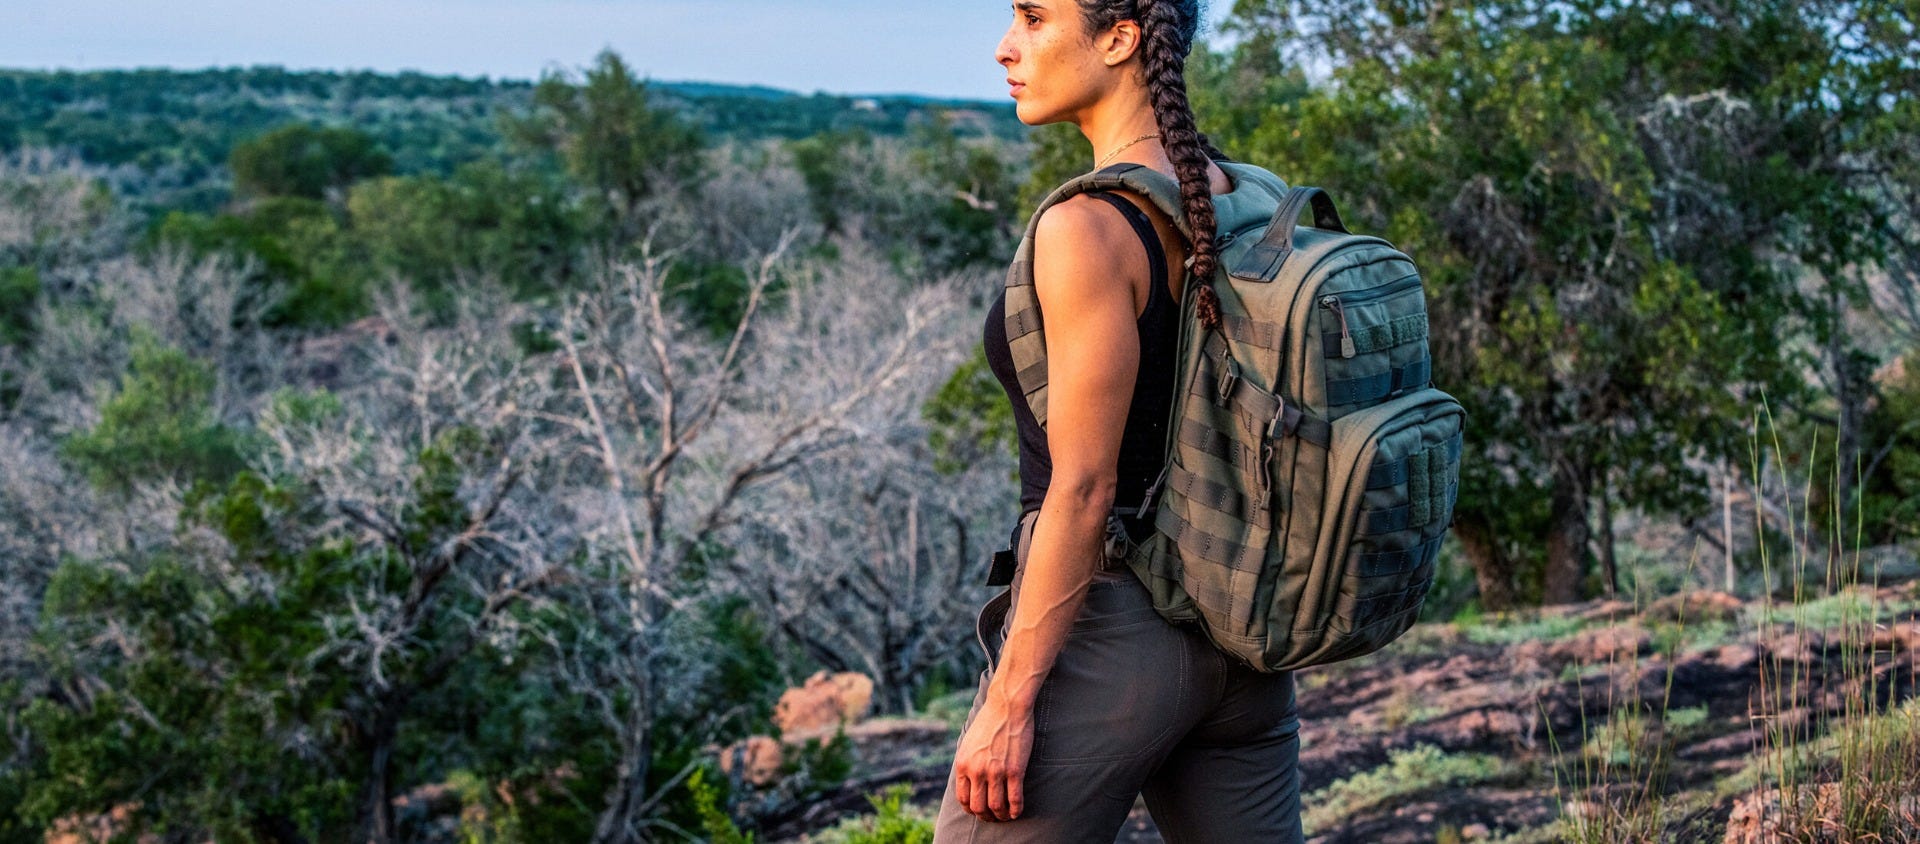 How To Be Eco-Conscious While Hiking